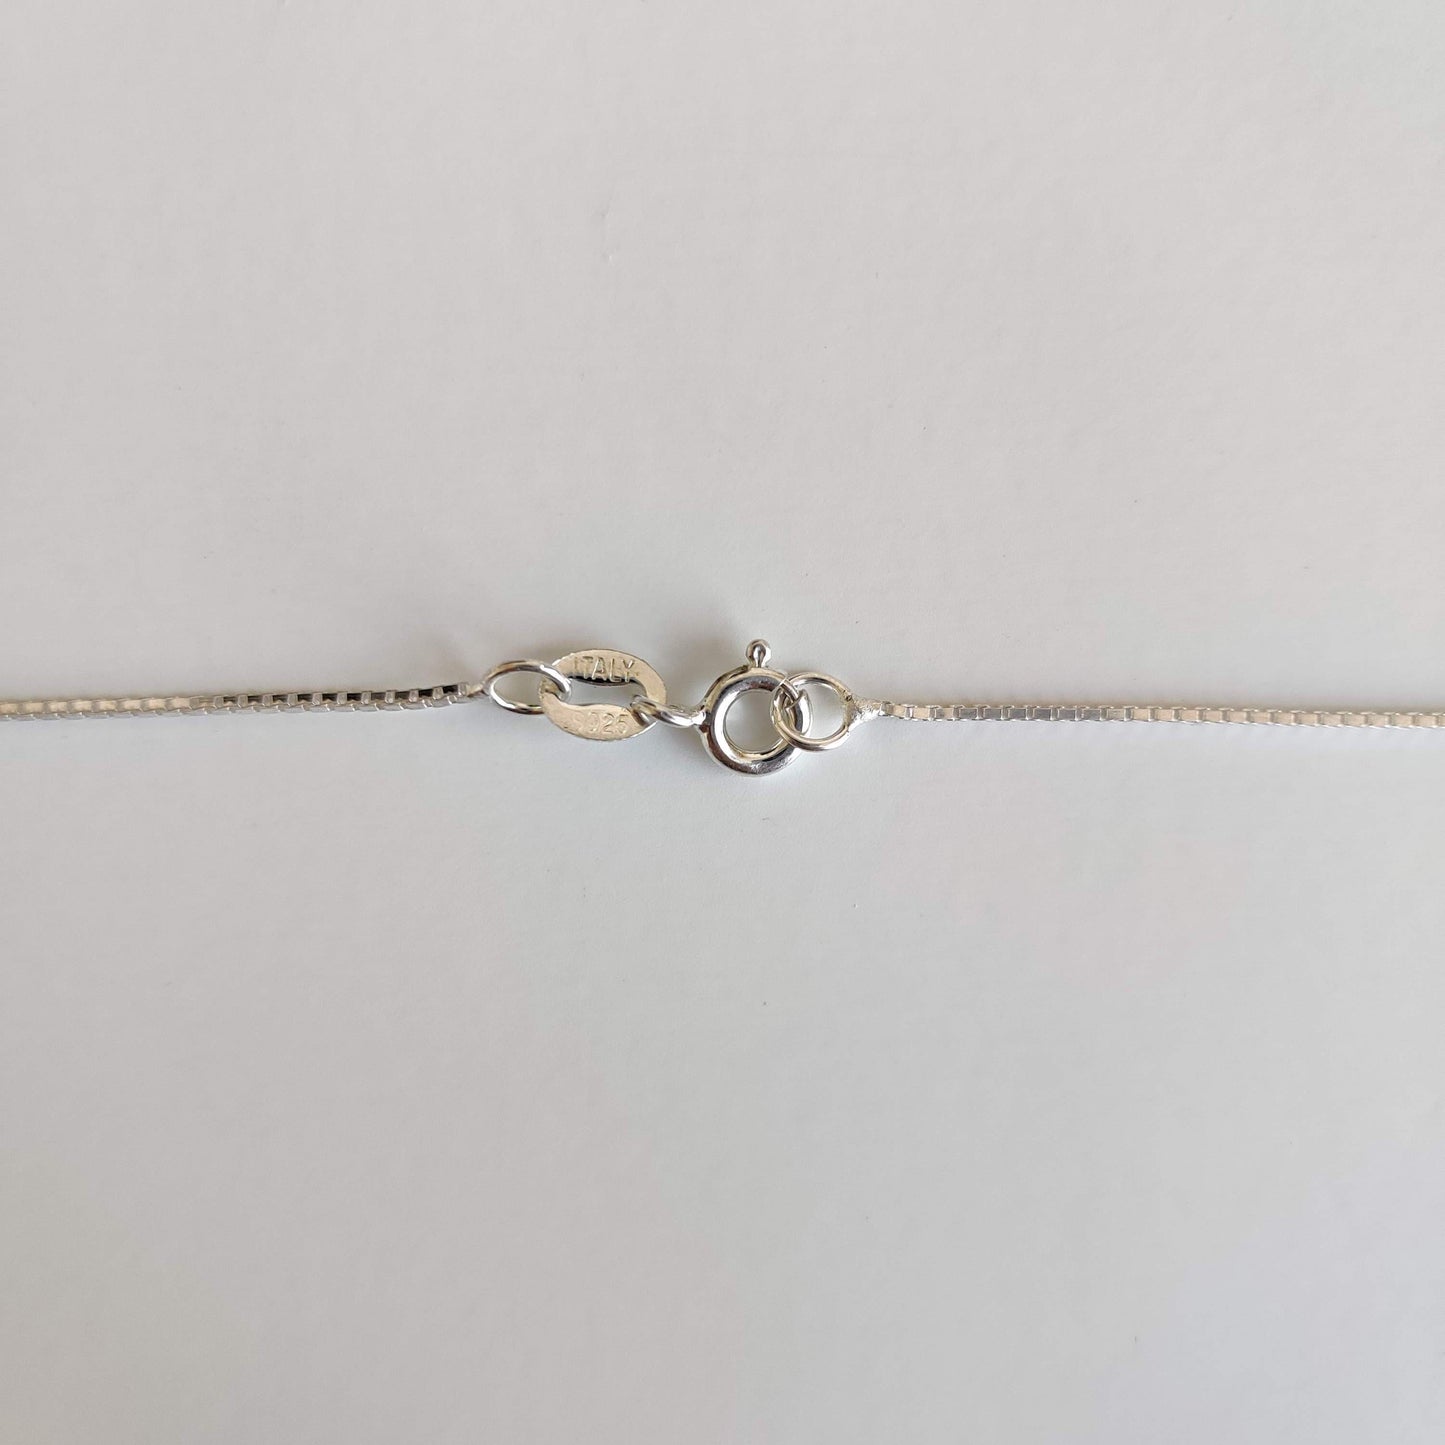 Sterling Silver 925 Box Chain Necklace - Rivendell Shop